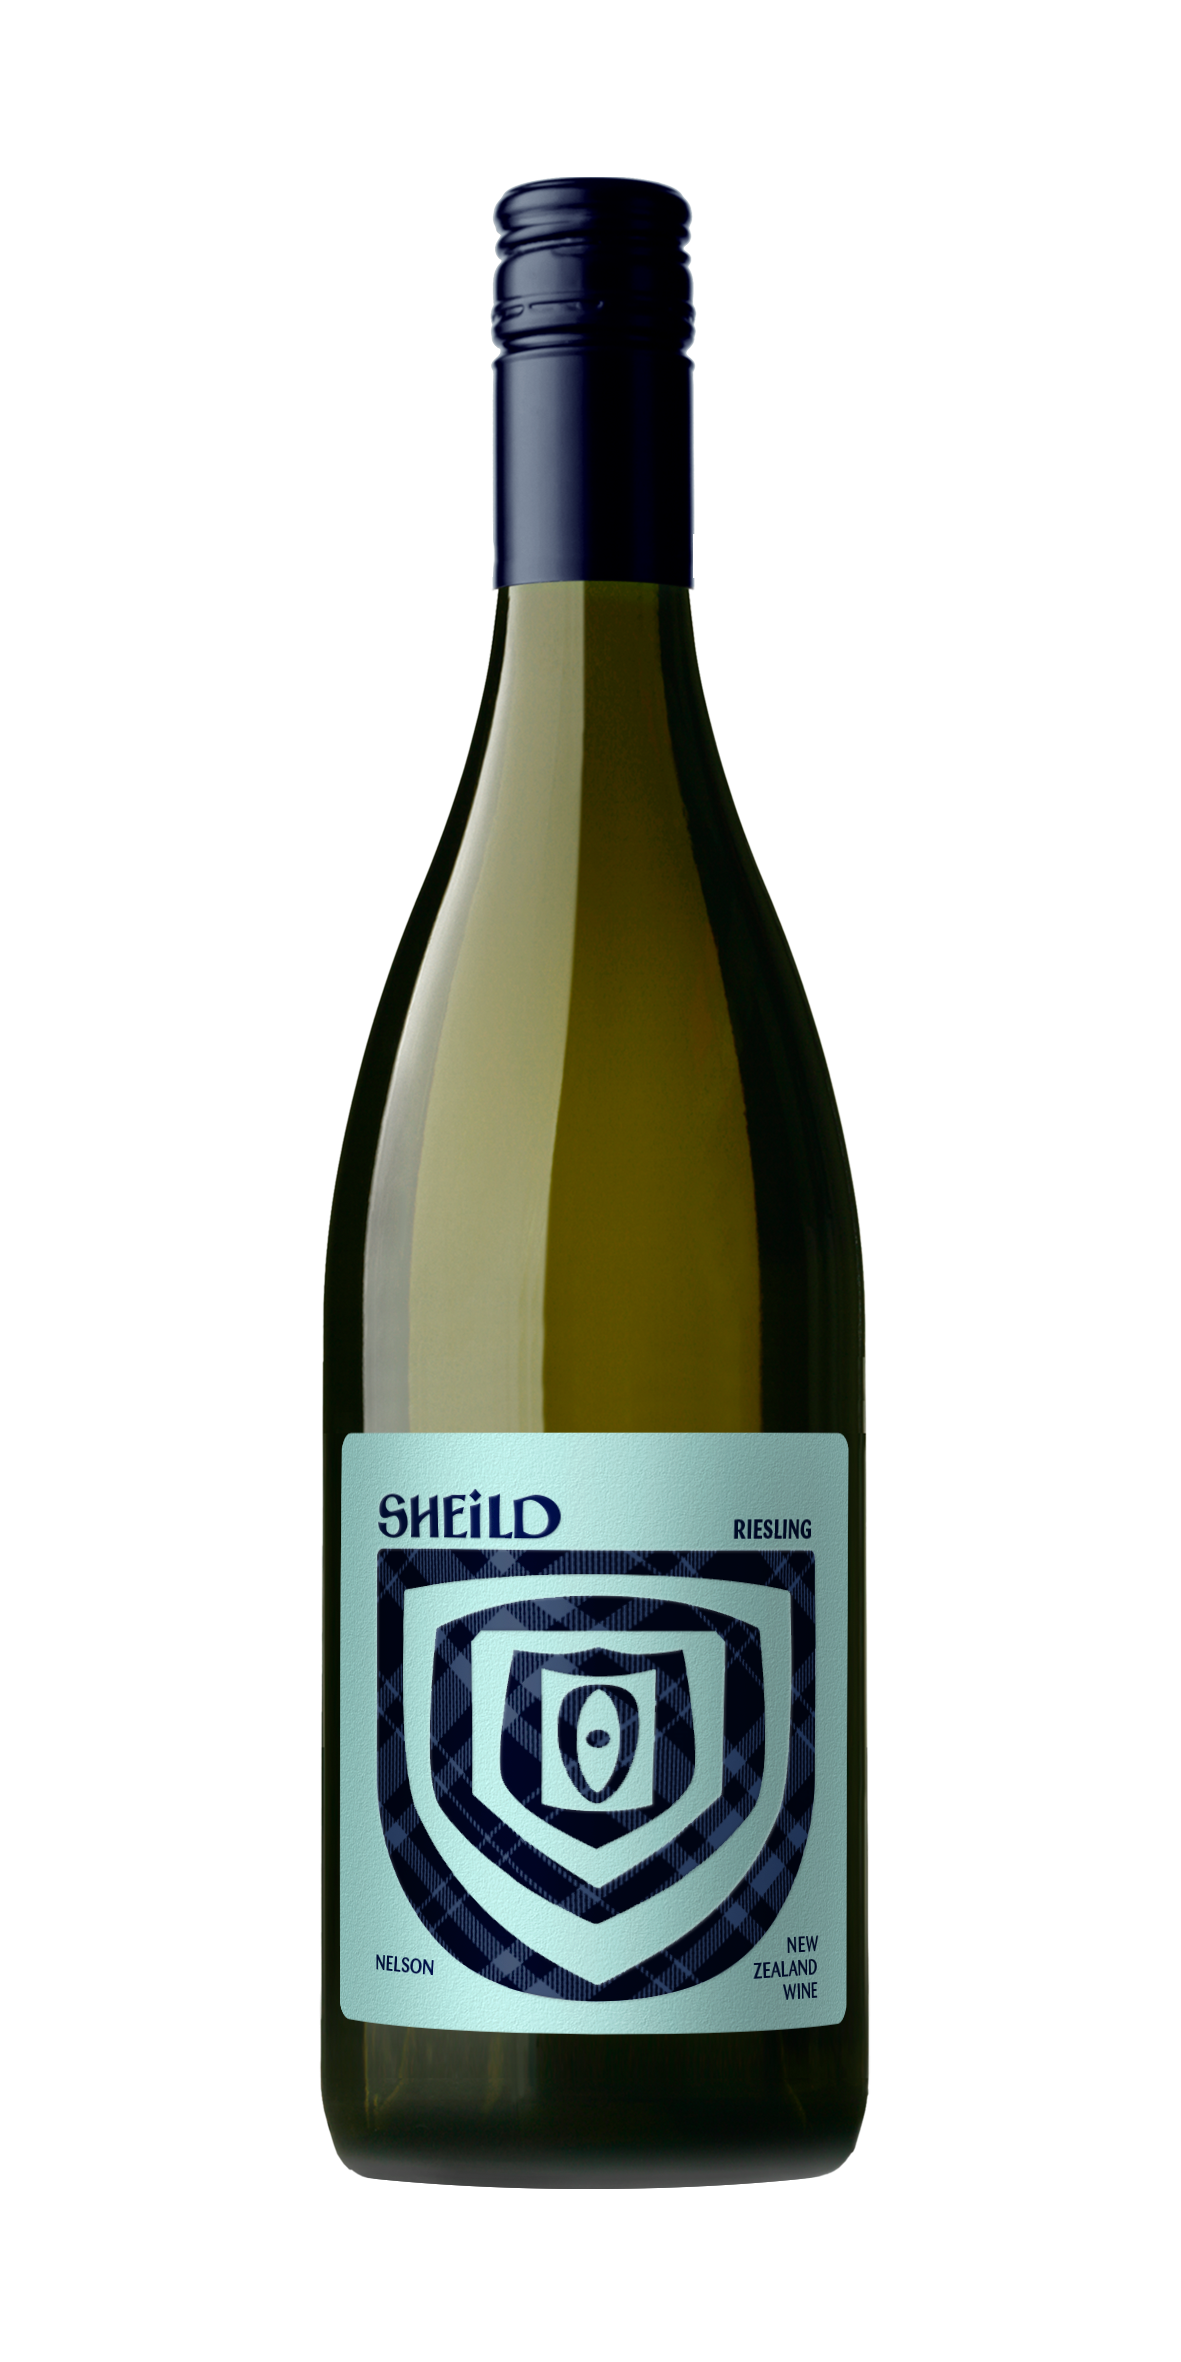 Bottle of SHEiLD's Riesling wine, with blue green label and dark blue cap/logo.